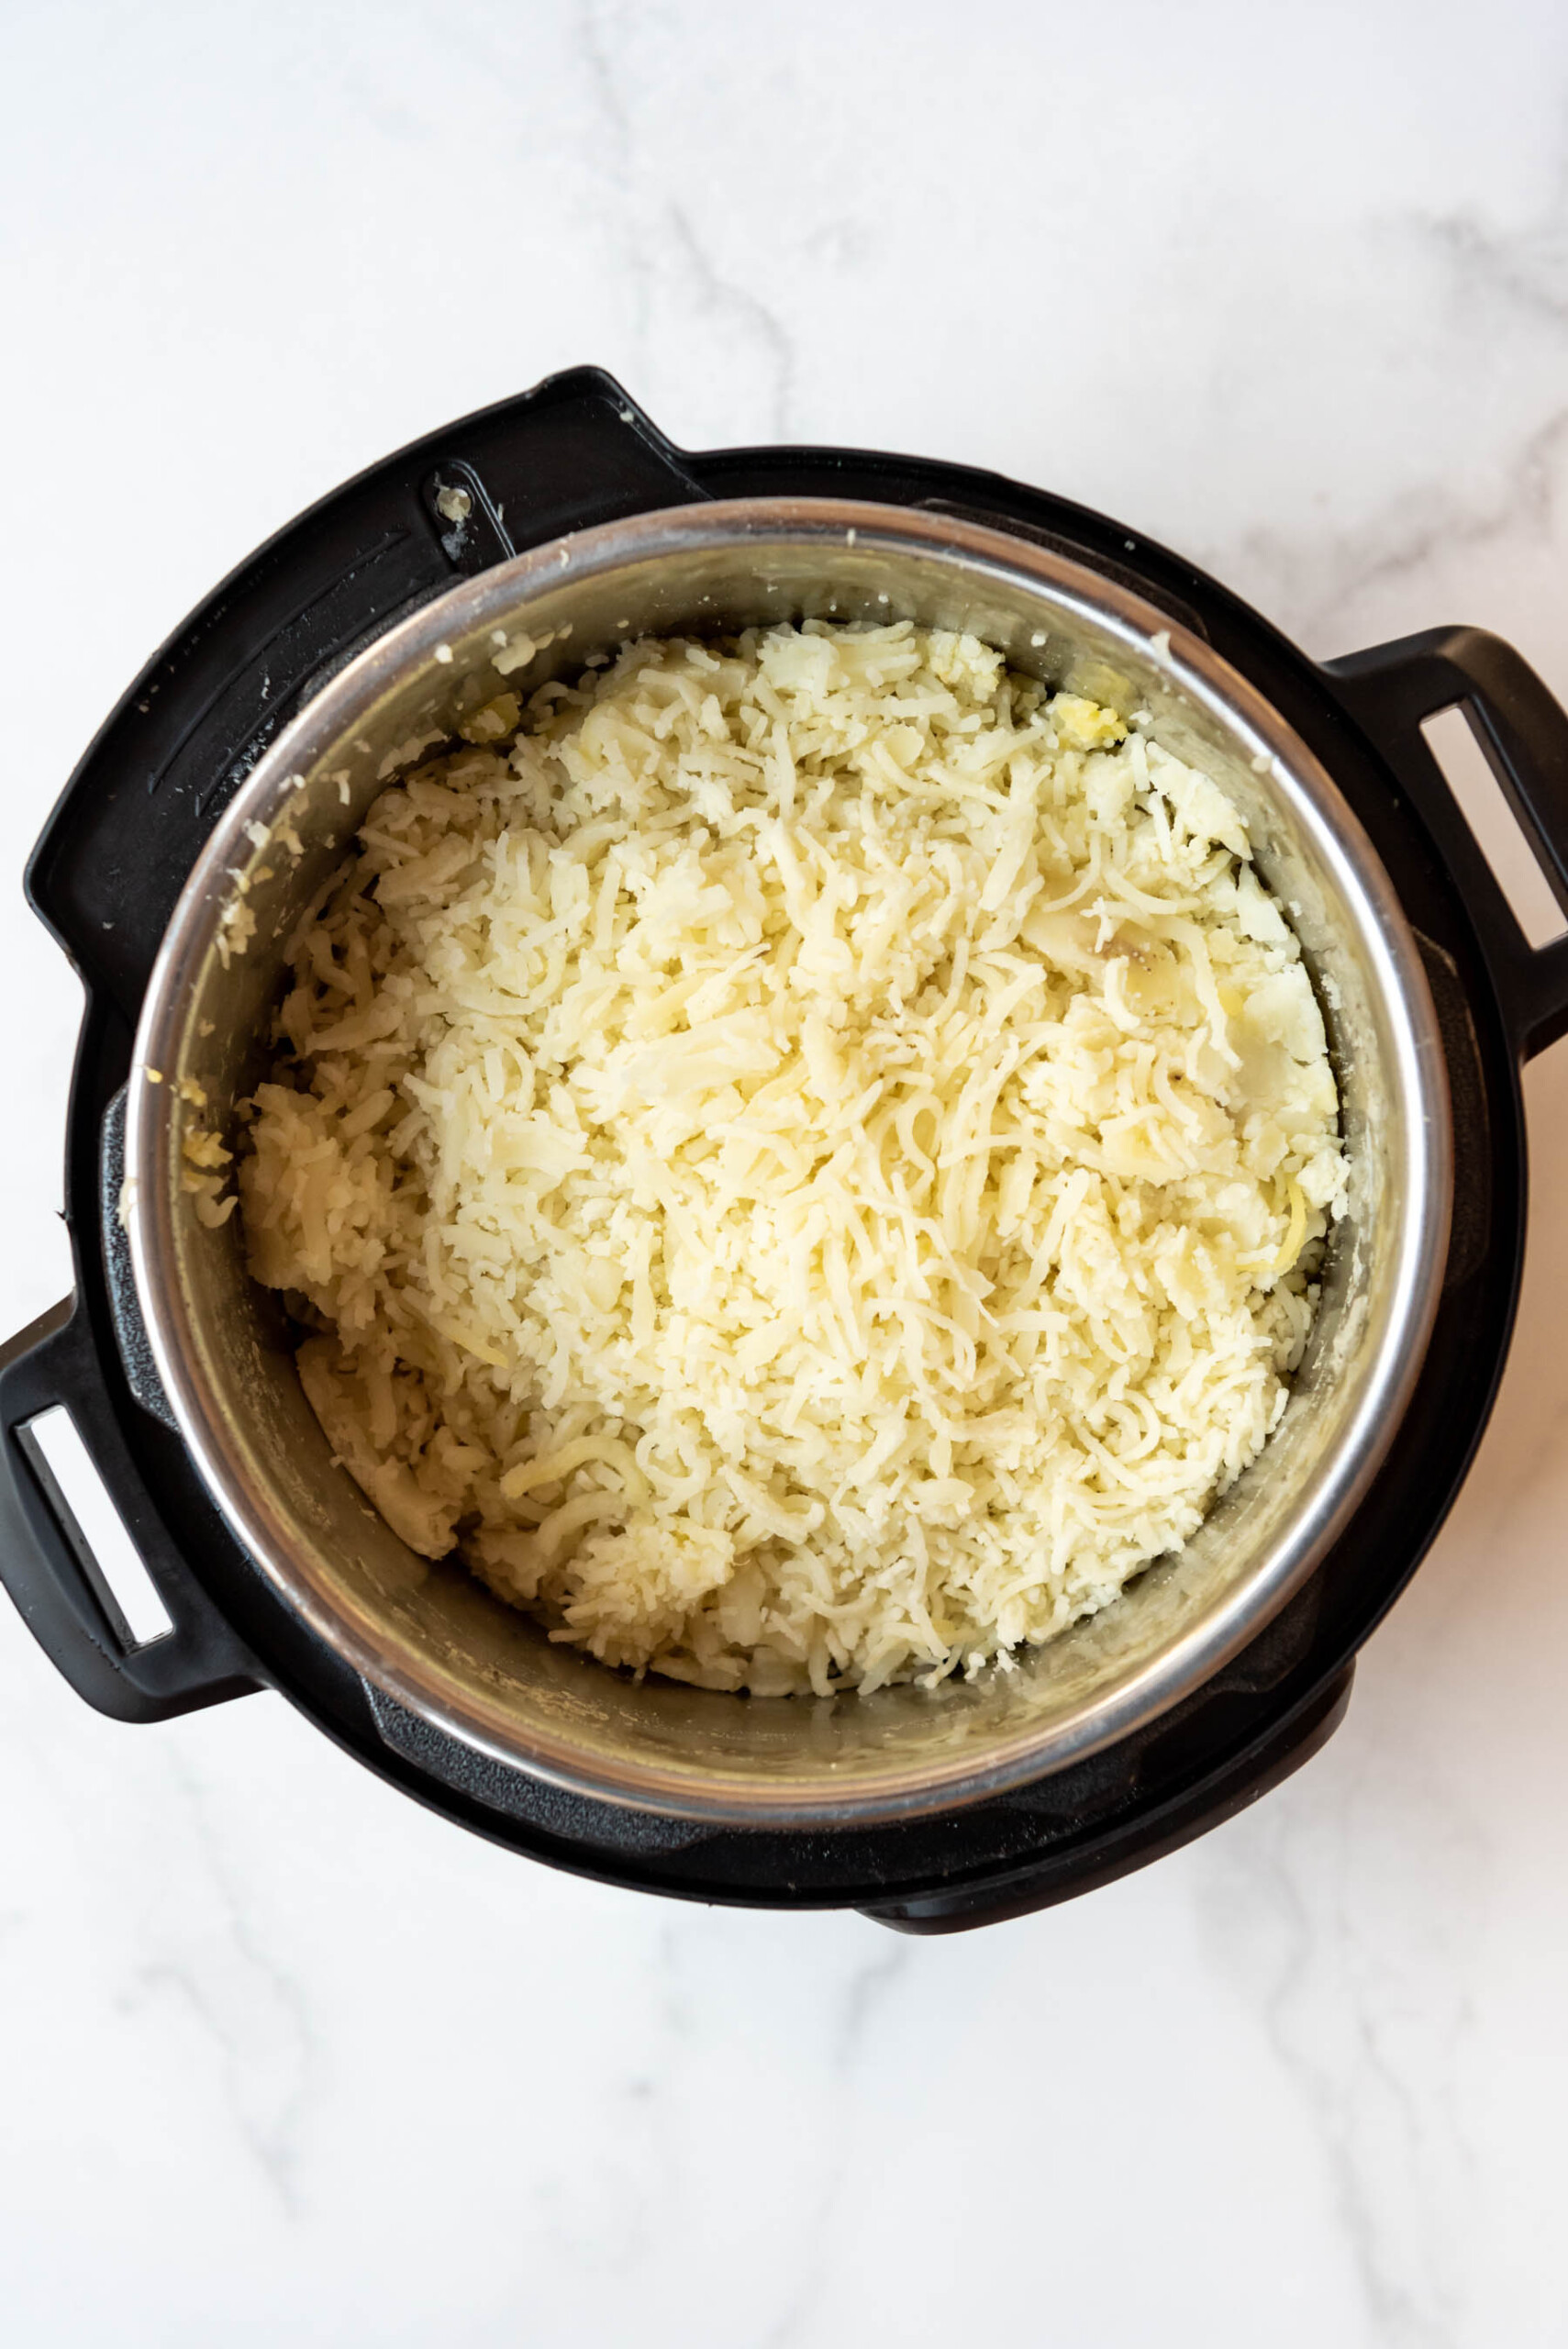 Top view of instant pot with freshly mashed potatoes inside. 